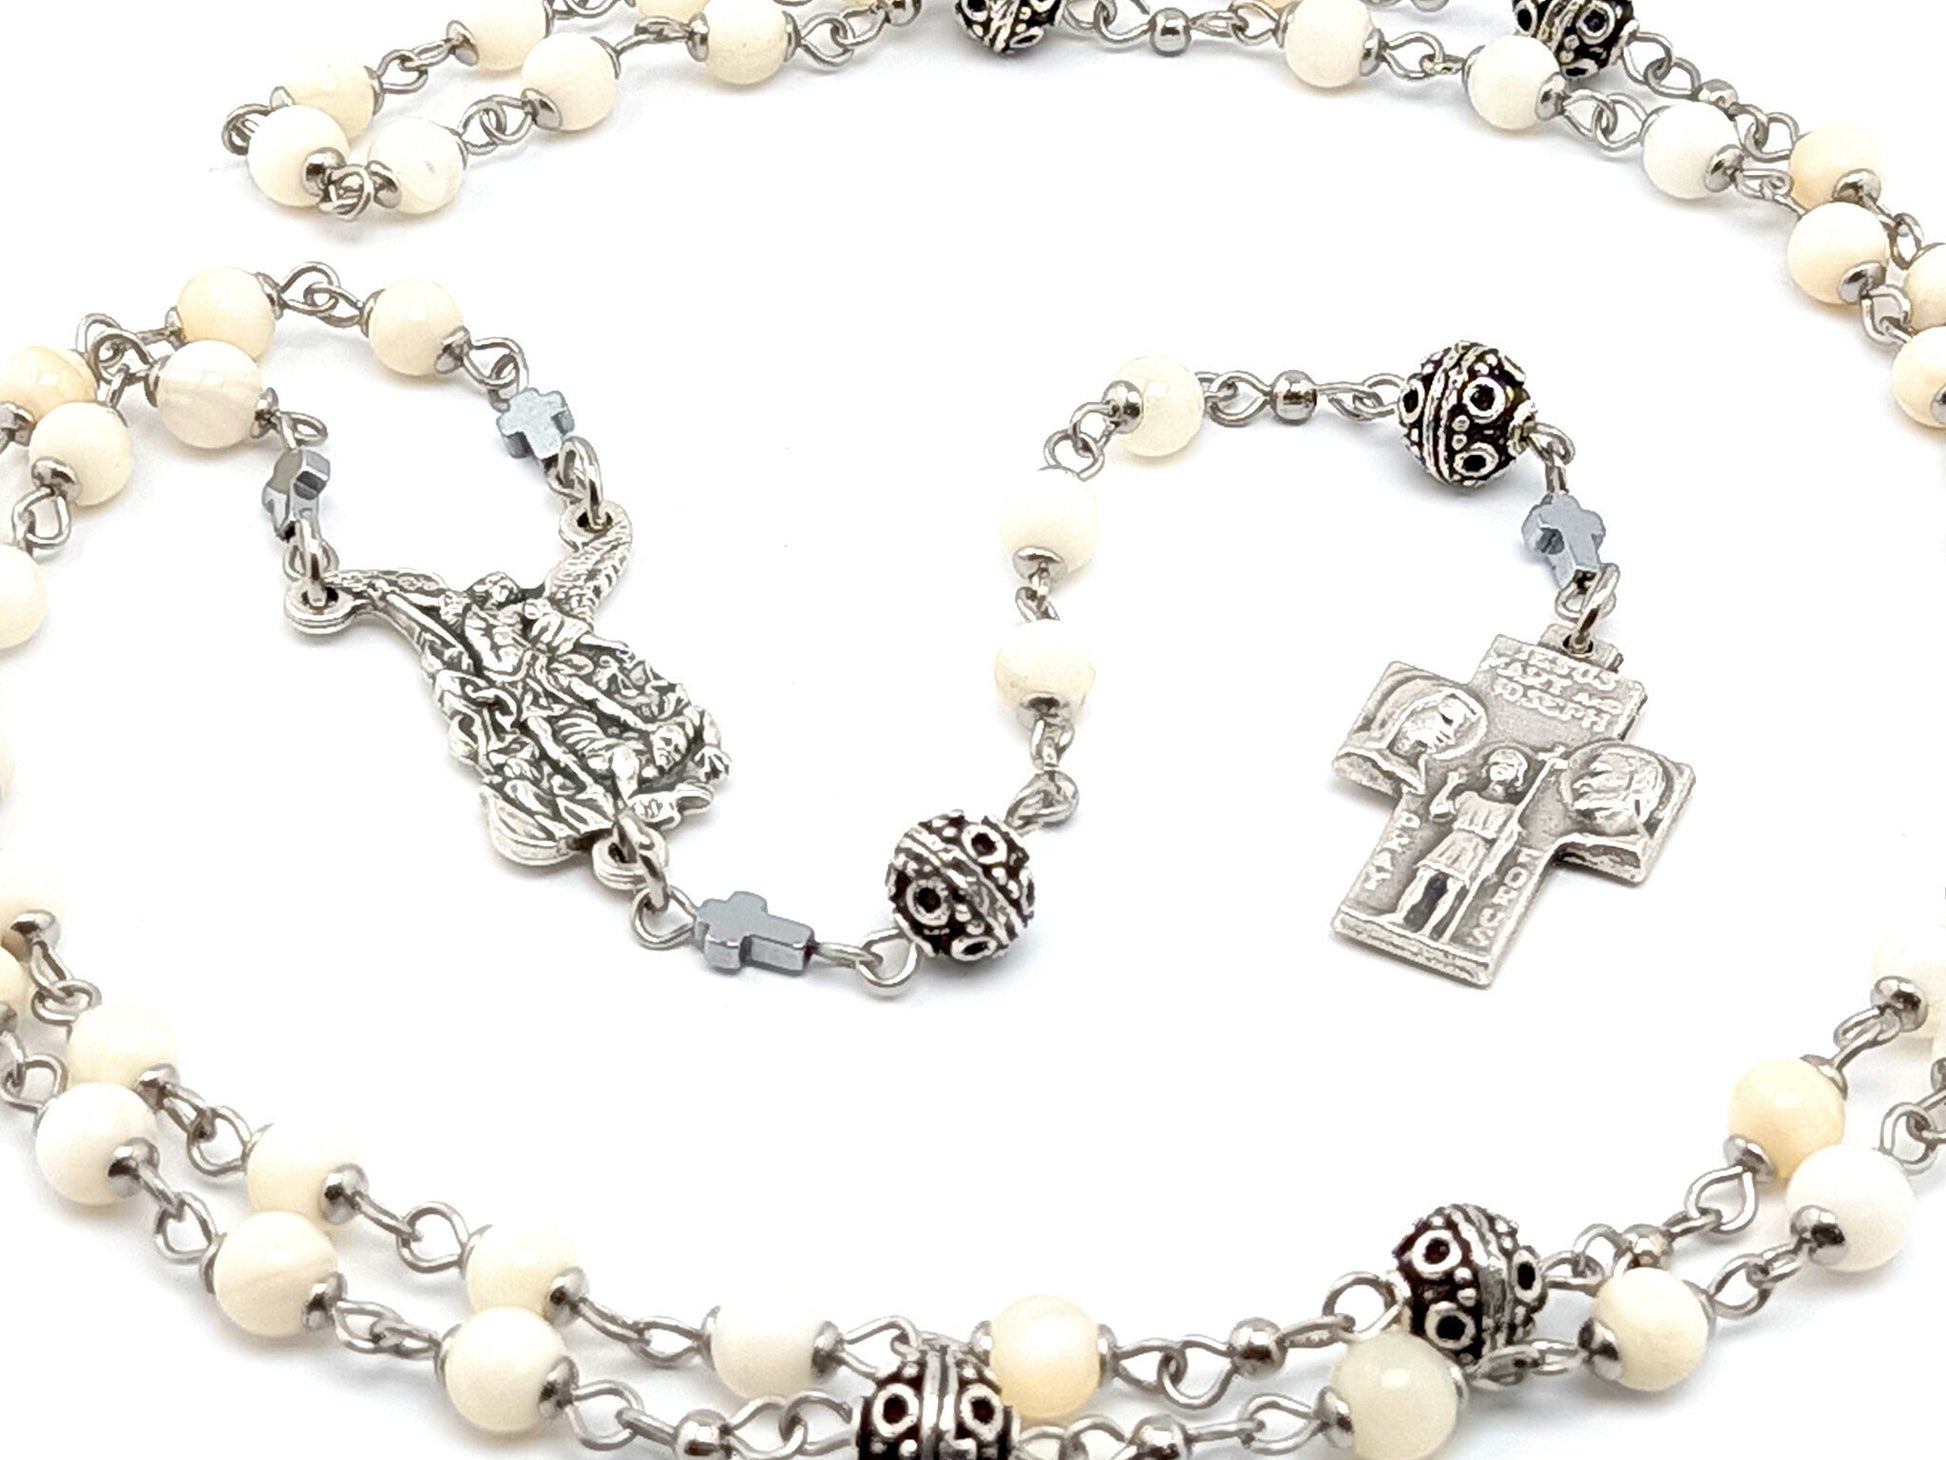 Saint Michael unique rosary beads mother of pearl rosary beads with Saint Christopher and the Holy Family silver cross.